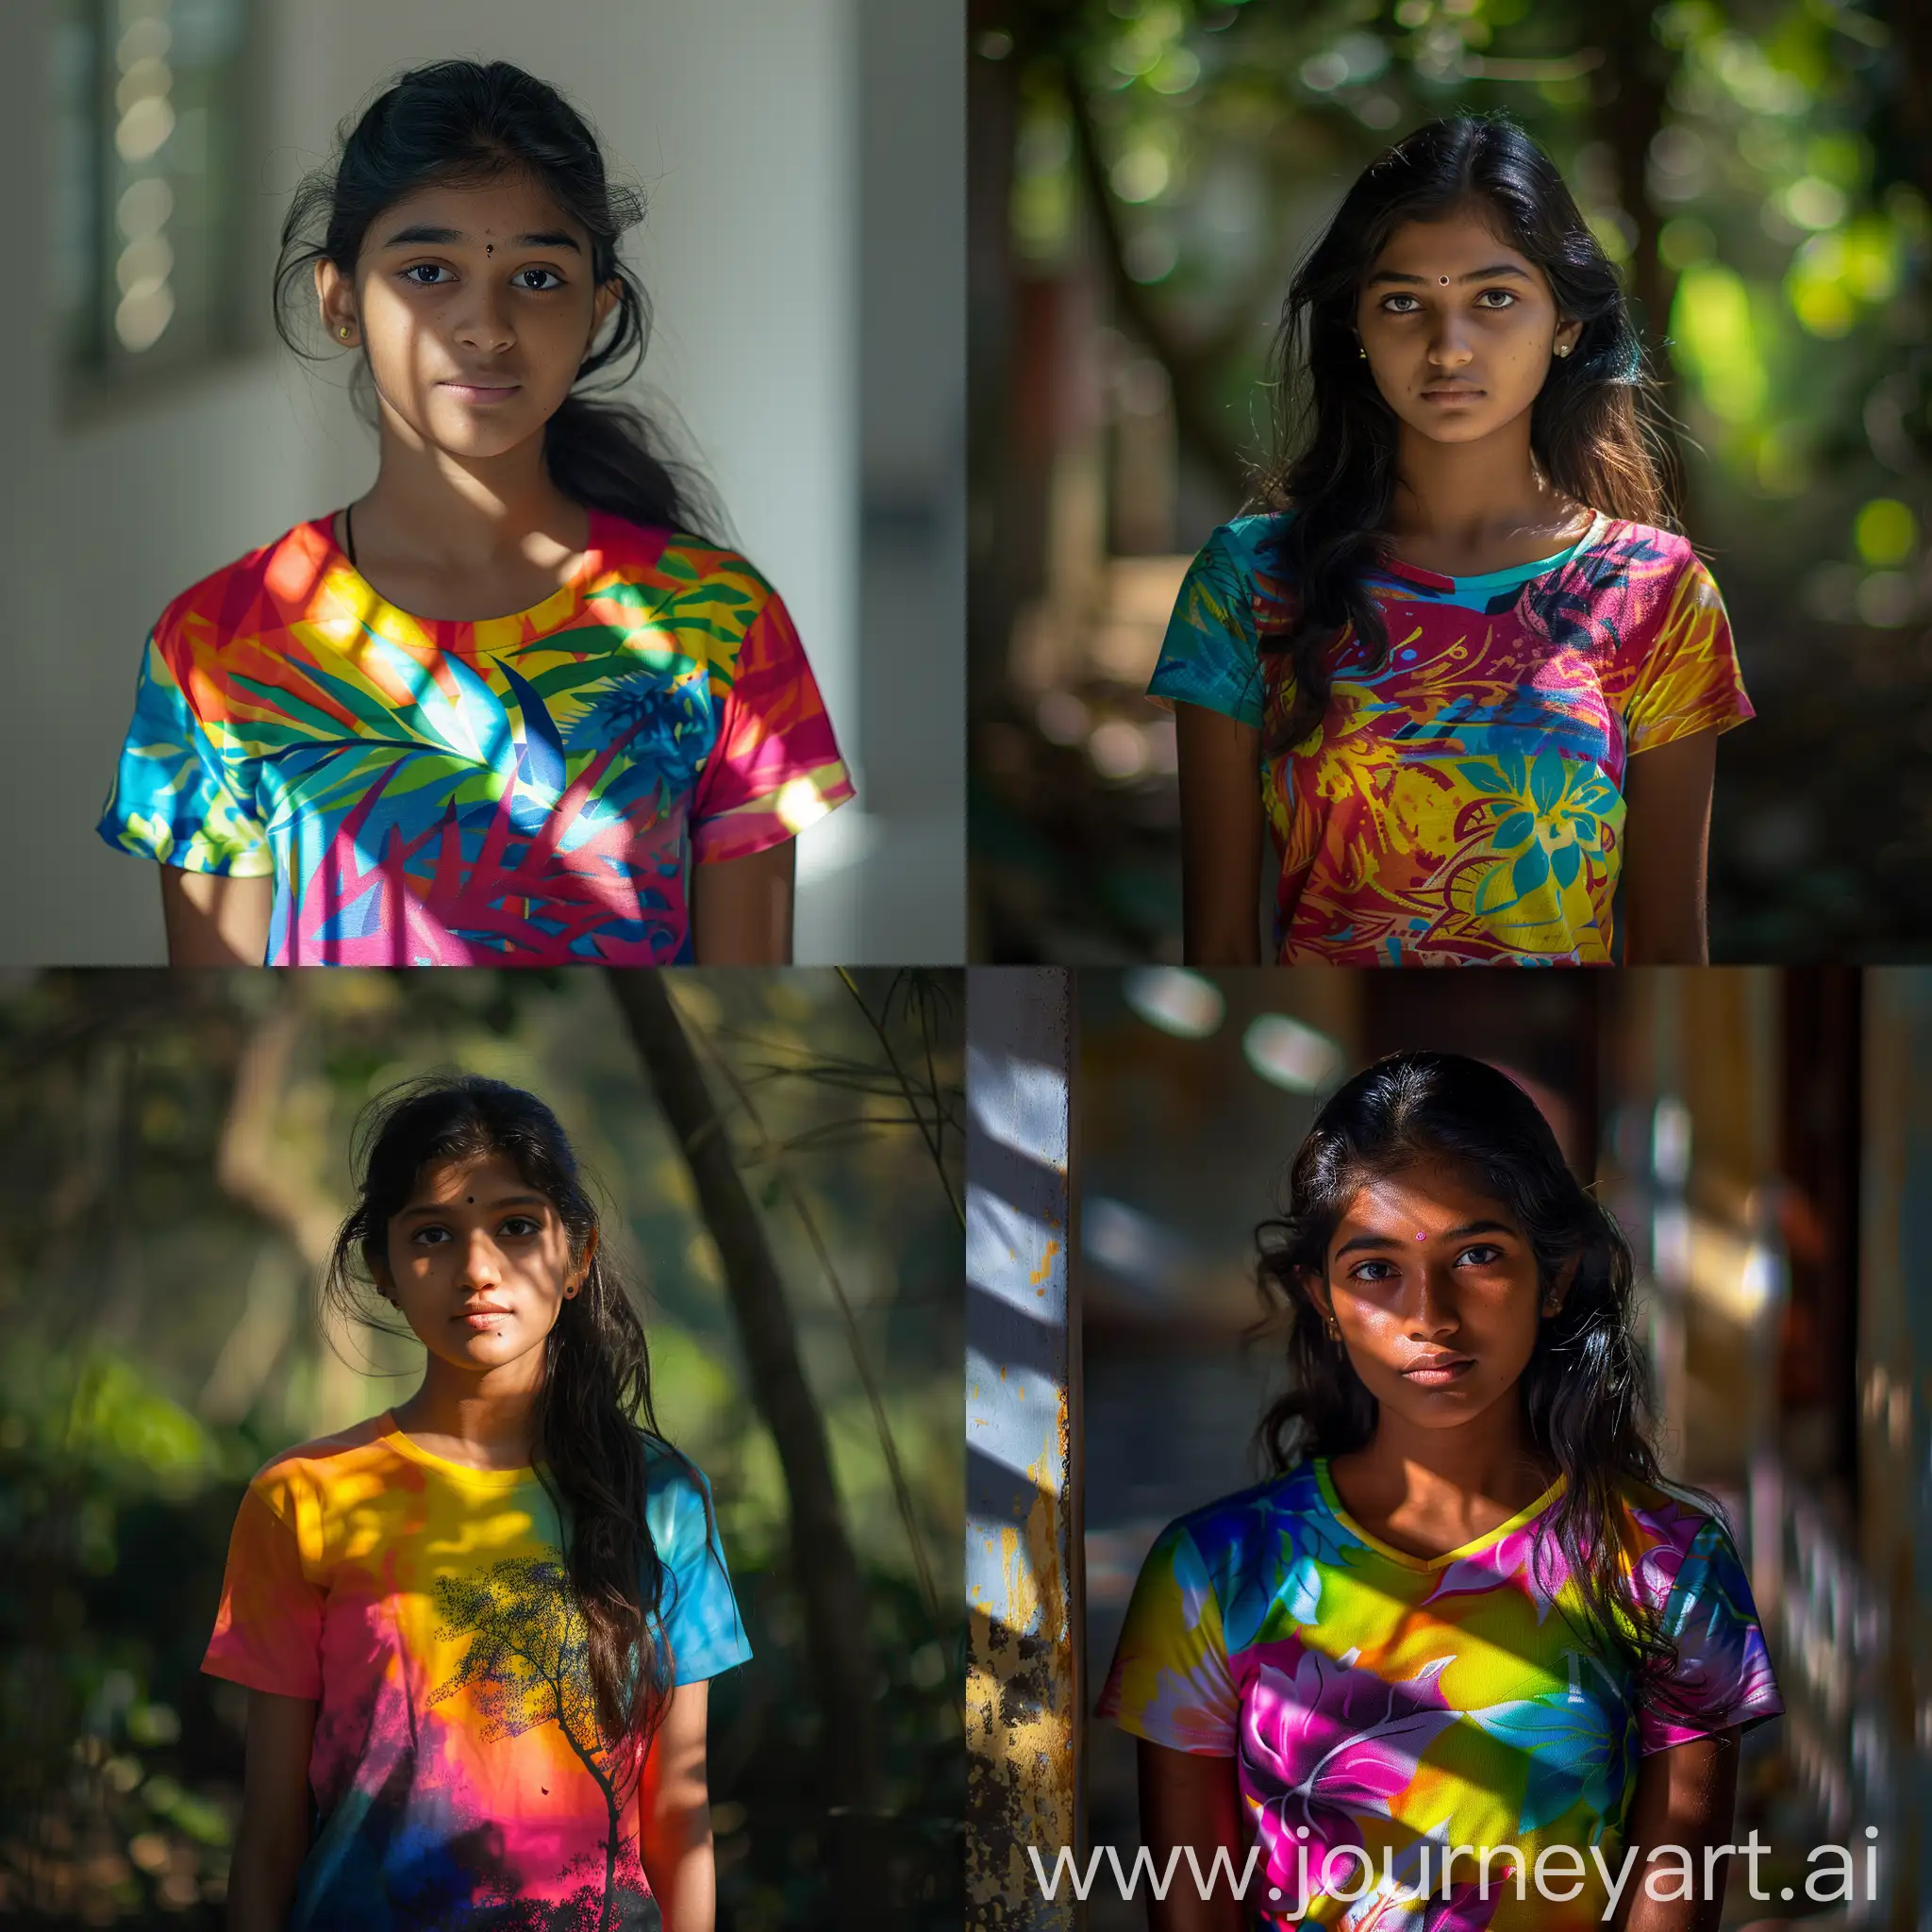 a very beautiful malayali 18 year old girl who is very attractive to the eye and mind wearing a colorful t shirt, high definition, hd, hdr, 4k resolution, majestic shadow play, eye level, bokeh, highly detailed, best quality, RAW photo, full body shot, professional photography, bokeh, natural lighting, Canon lens, shot on a 64-megapixel DSLR camera, sharp focus, waist shot, half body shot.